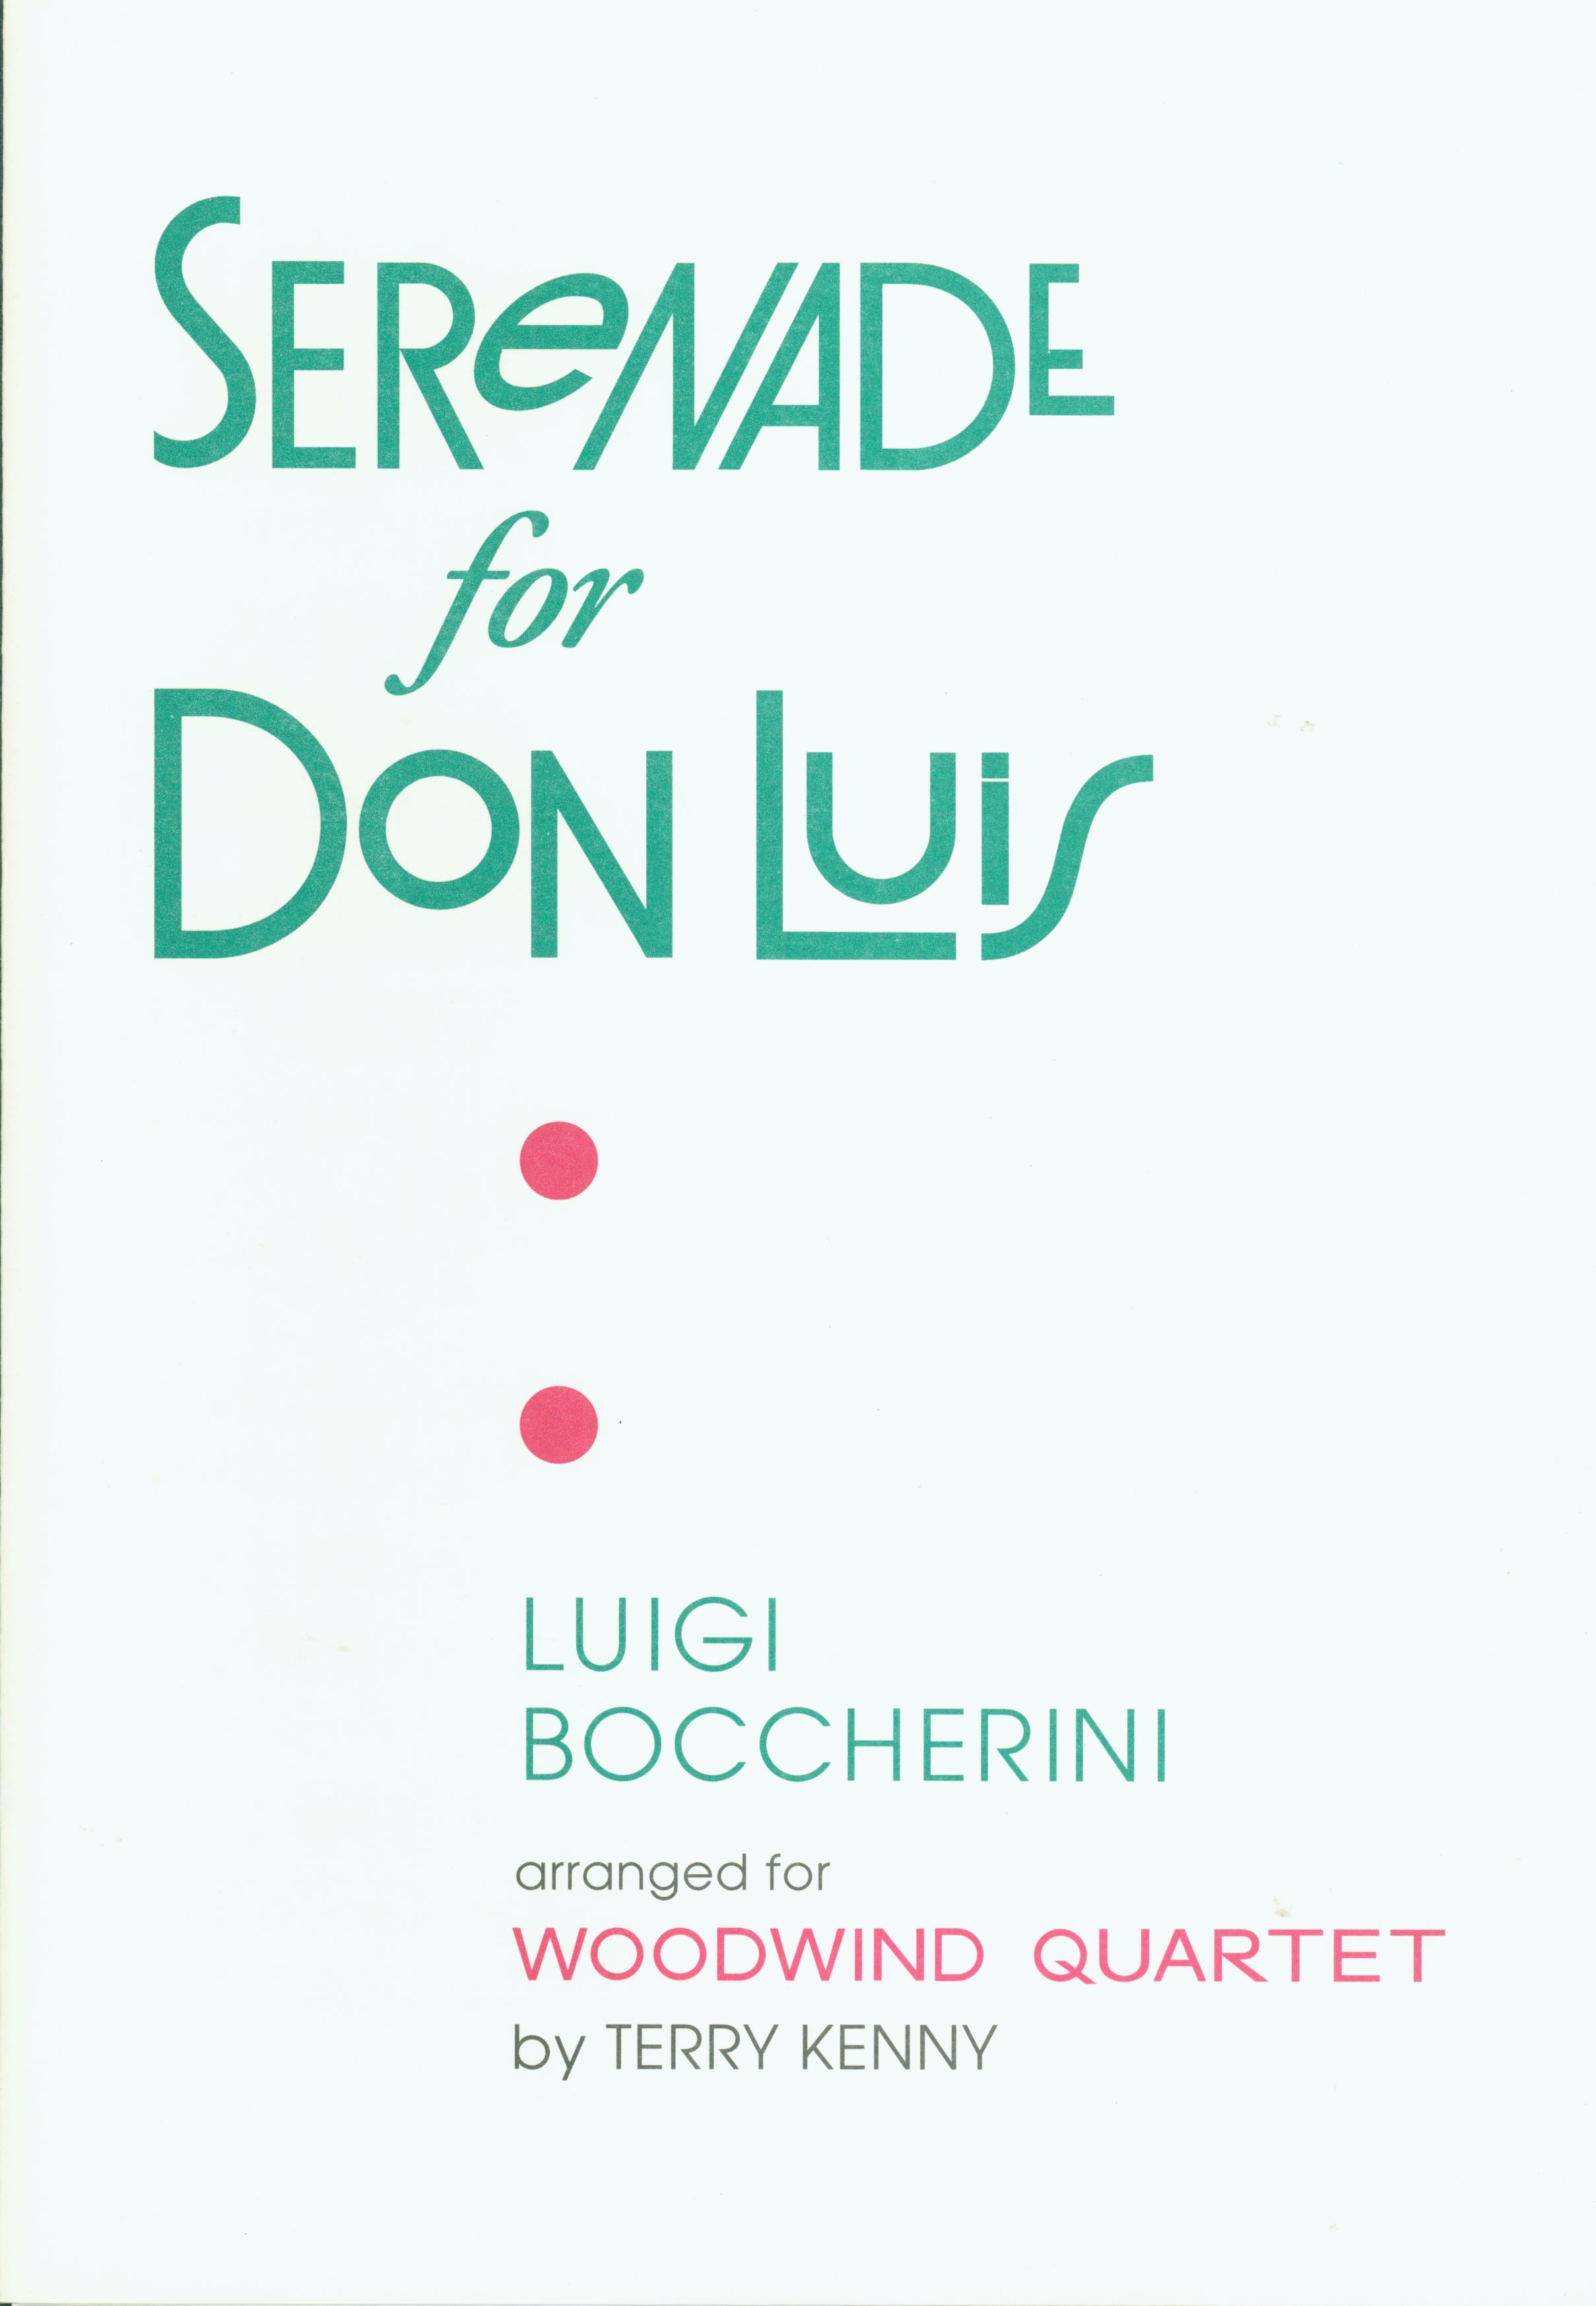 Outer cover of item Serenade for Don Luis